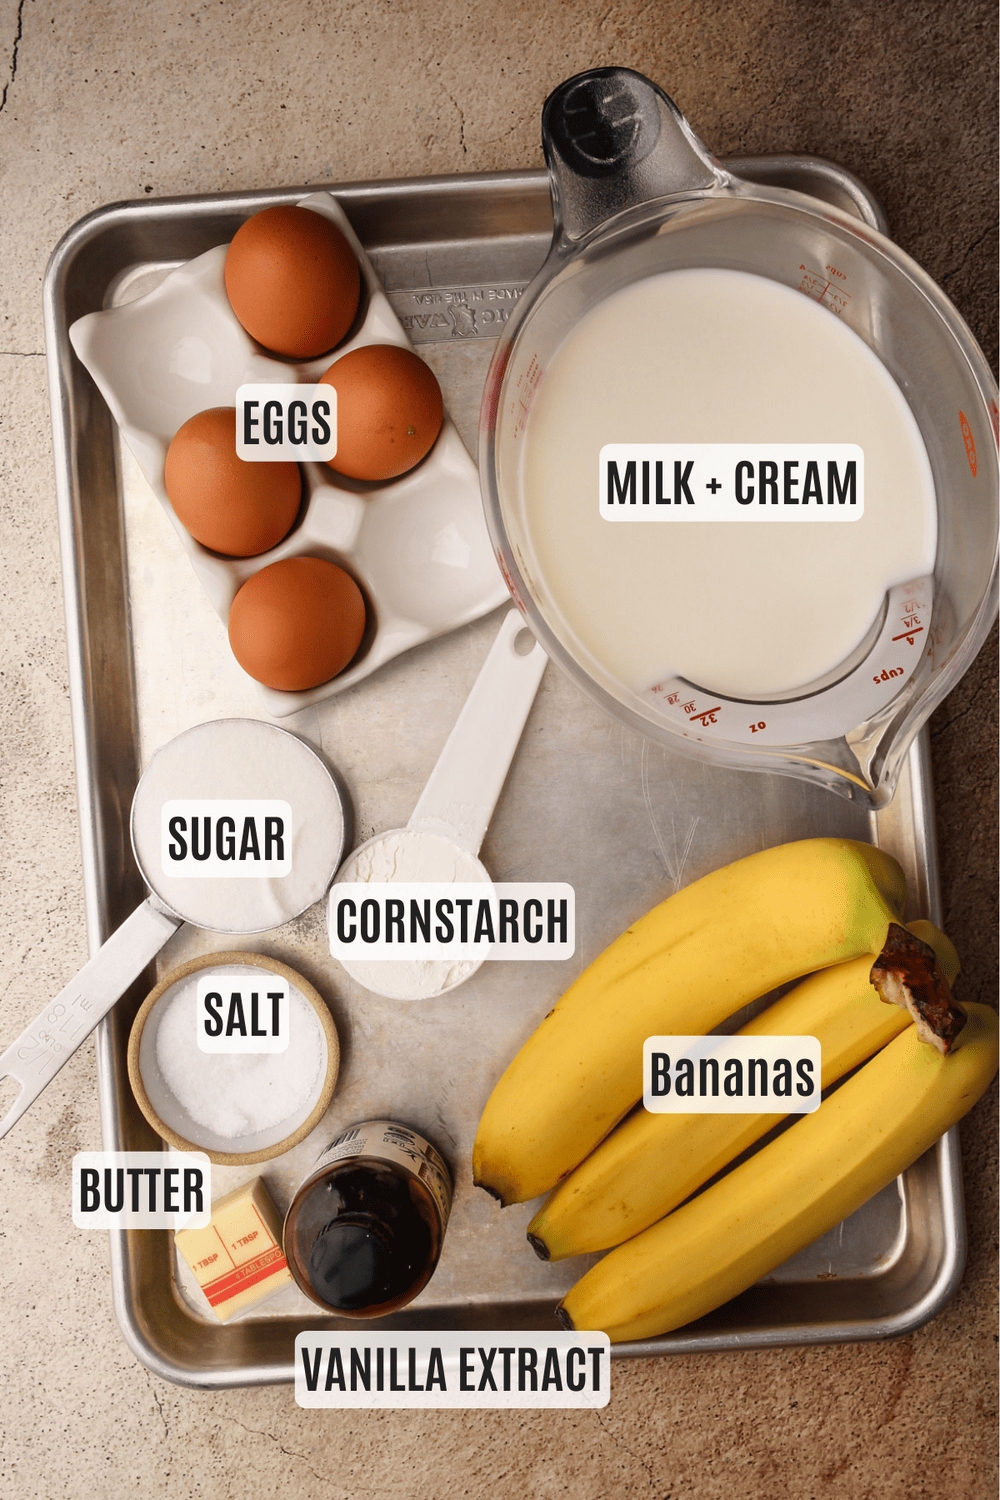 Measured ingredients for a banana cream pie recipe.